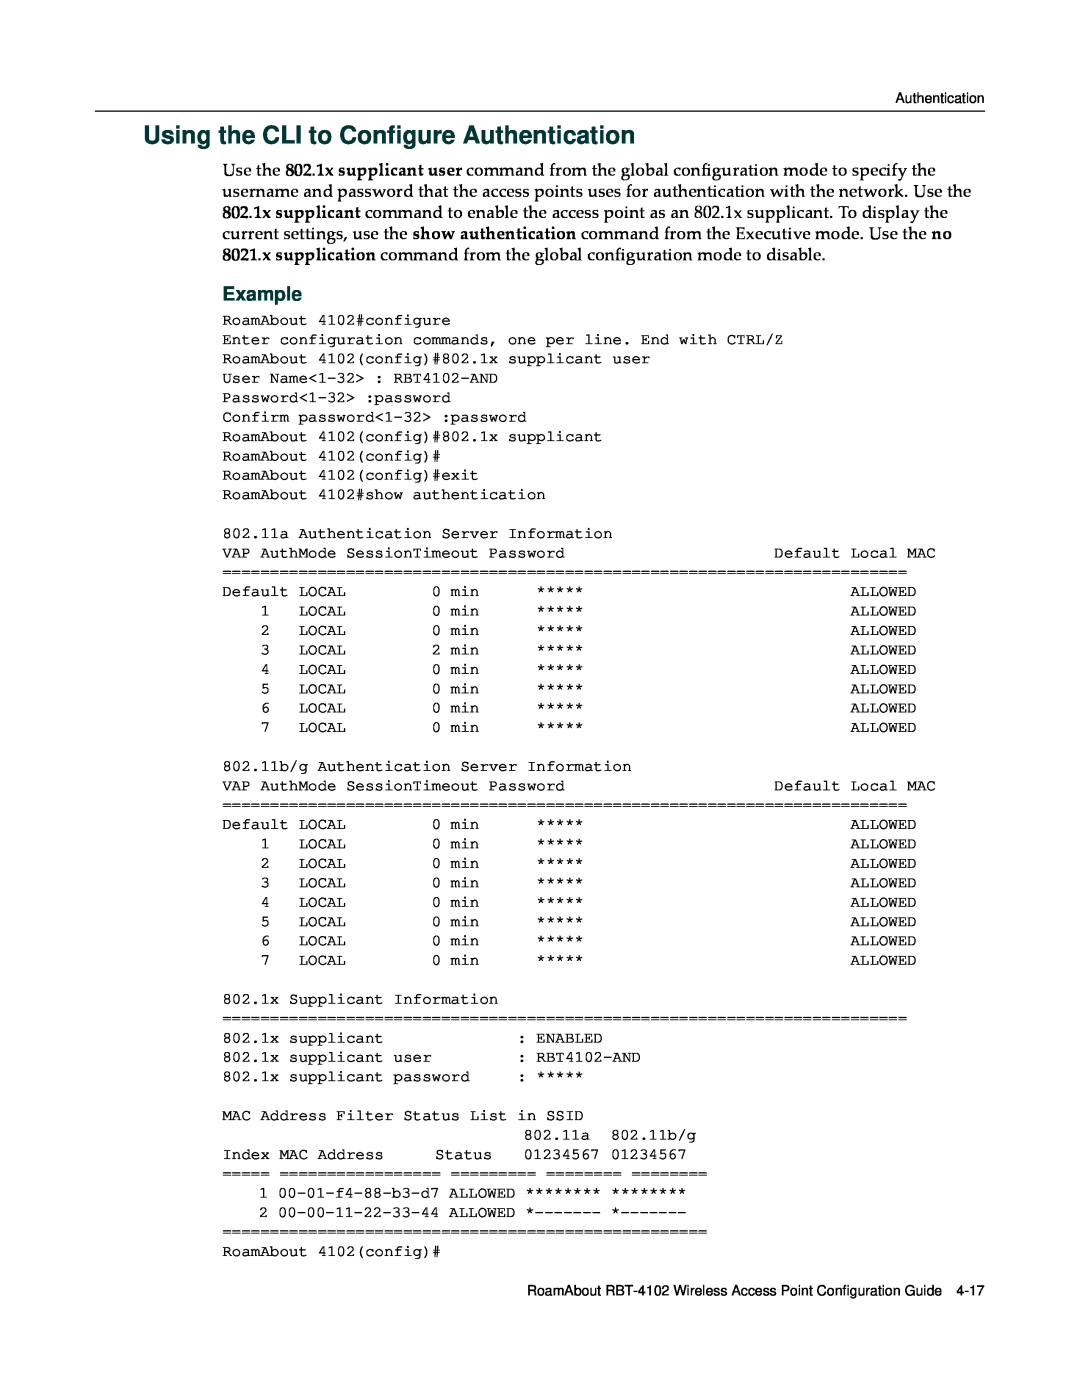 Enterasys Networks RBT-4102 manual Using the CLI to Configure Authentication, Example 